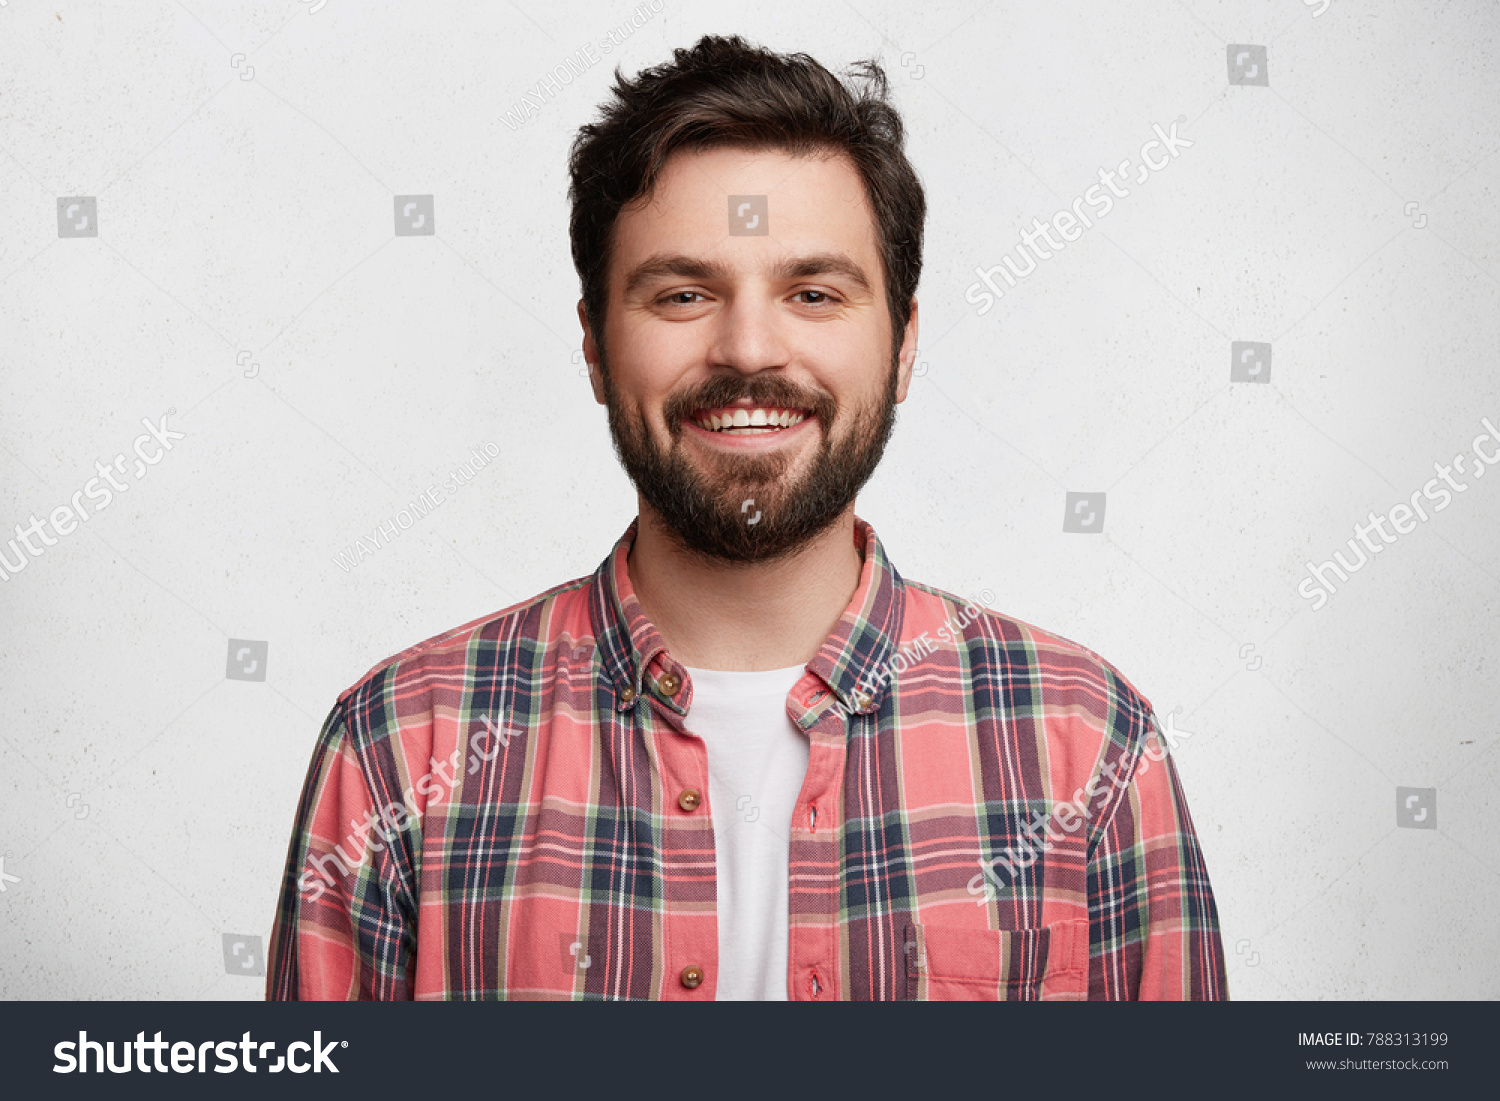 Smiling bearded young male model rejoices coming weekends, dressed casually, isolated over white background. Positive pleased student being in good mood after successfully passed exams at college #788313199